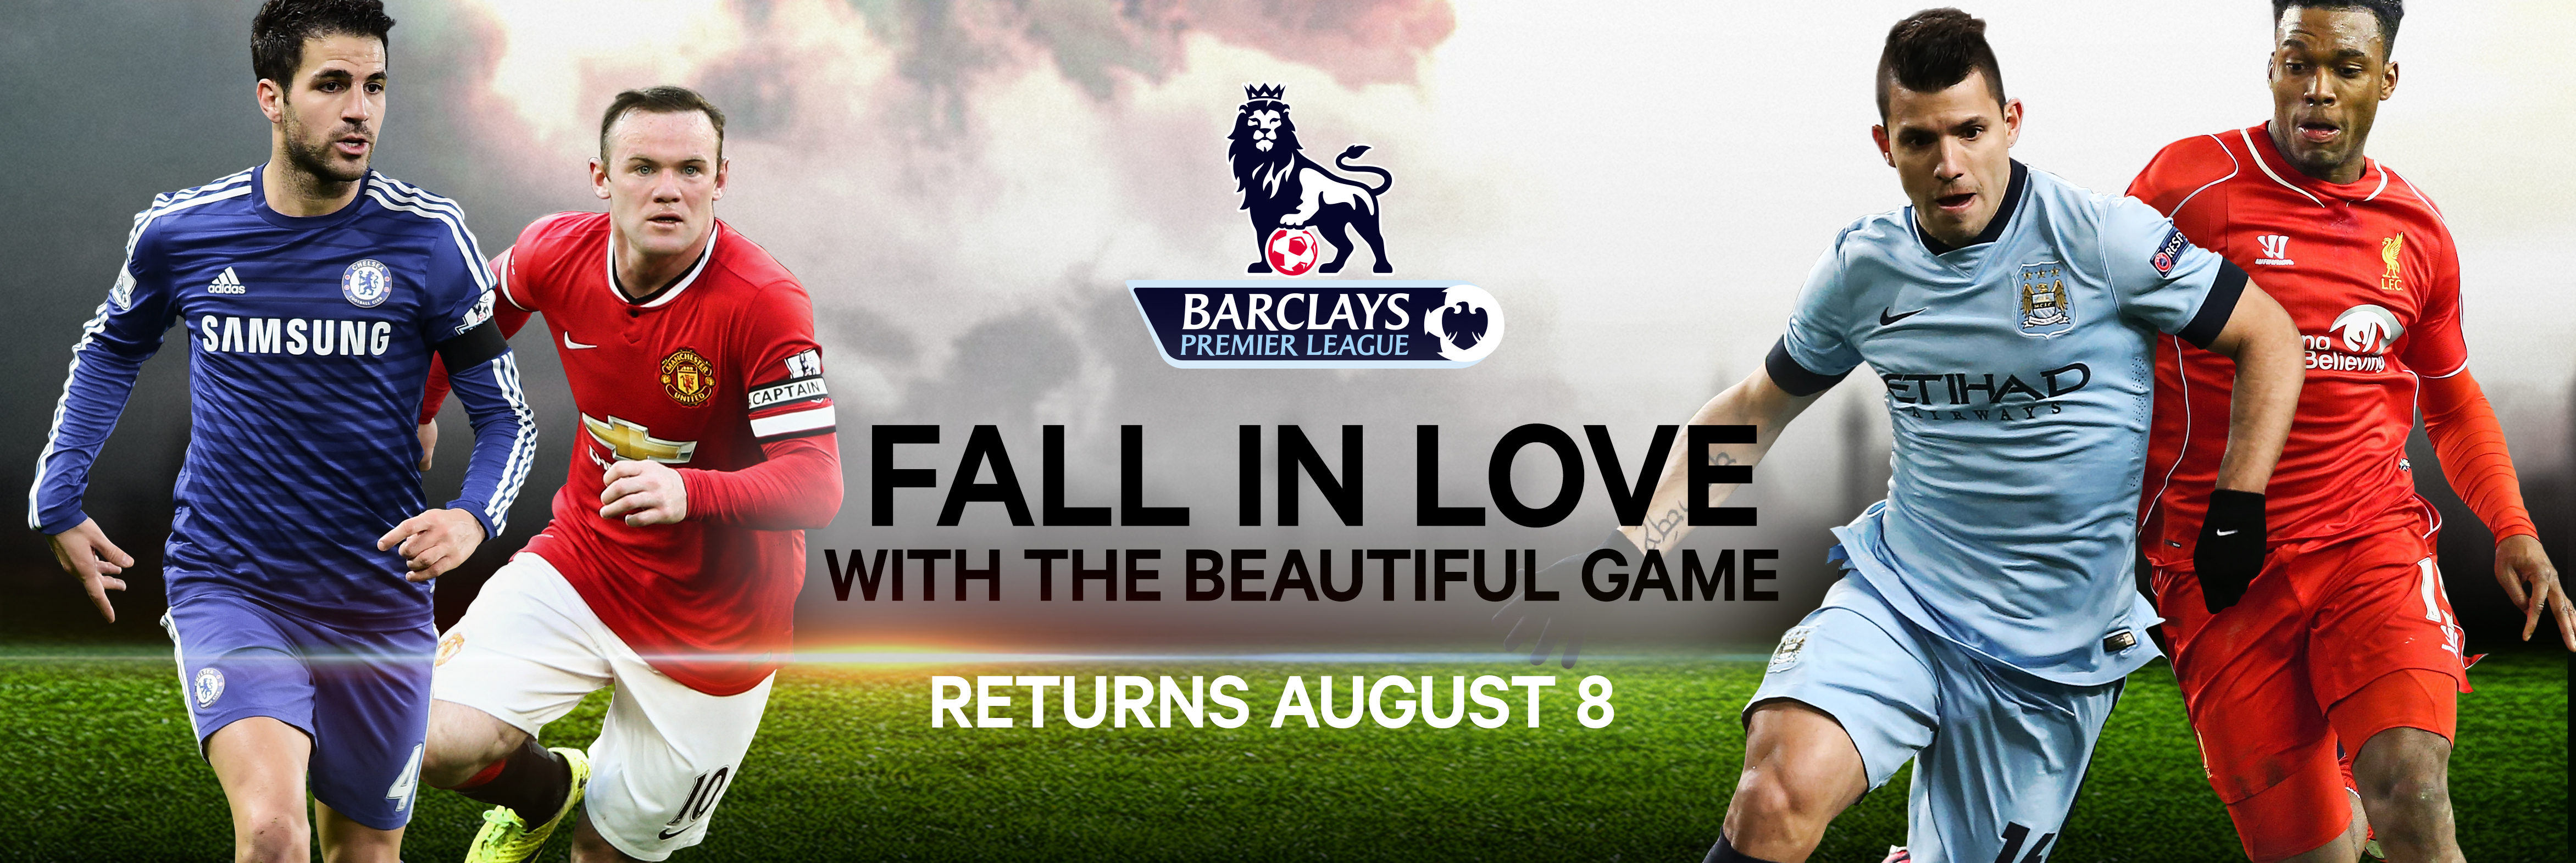 BPL TWITTER COVER PHOTO